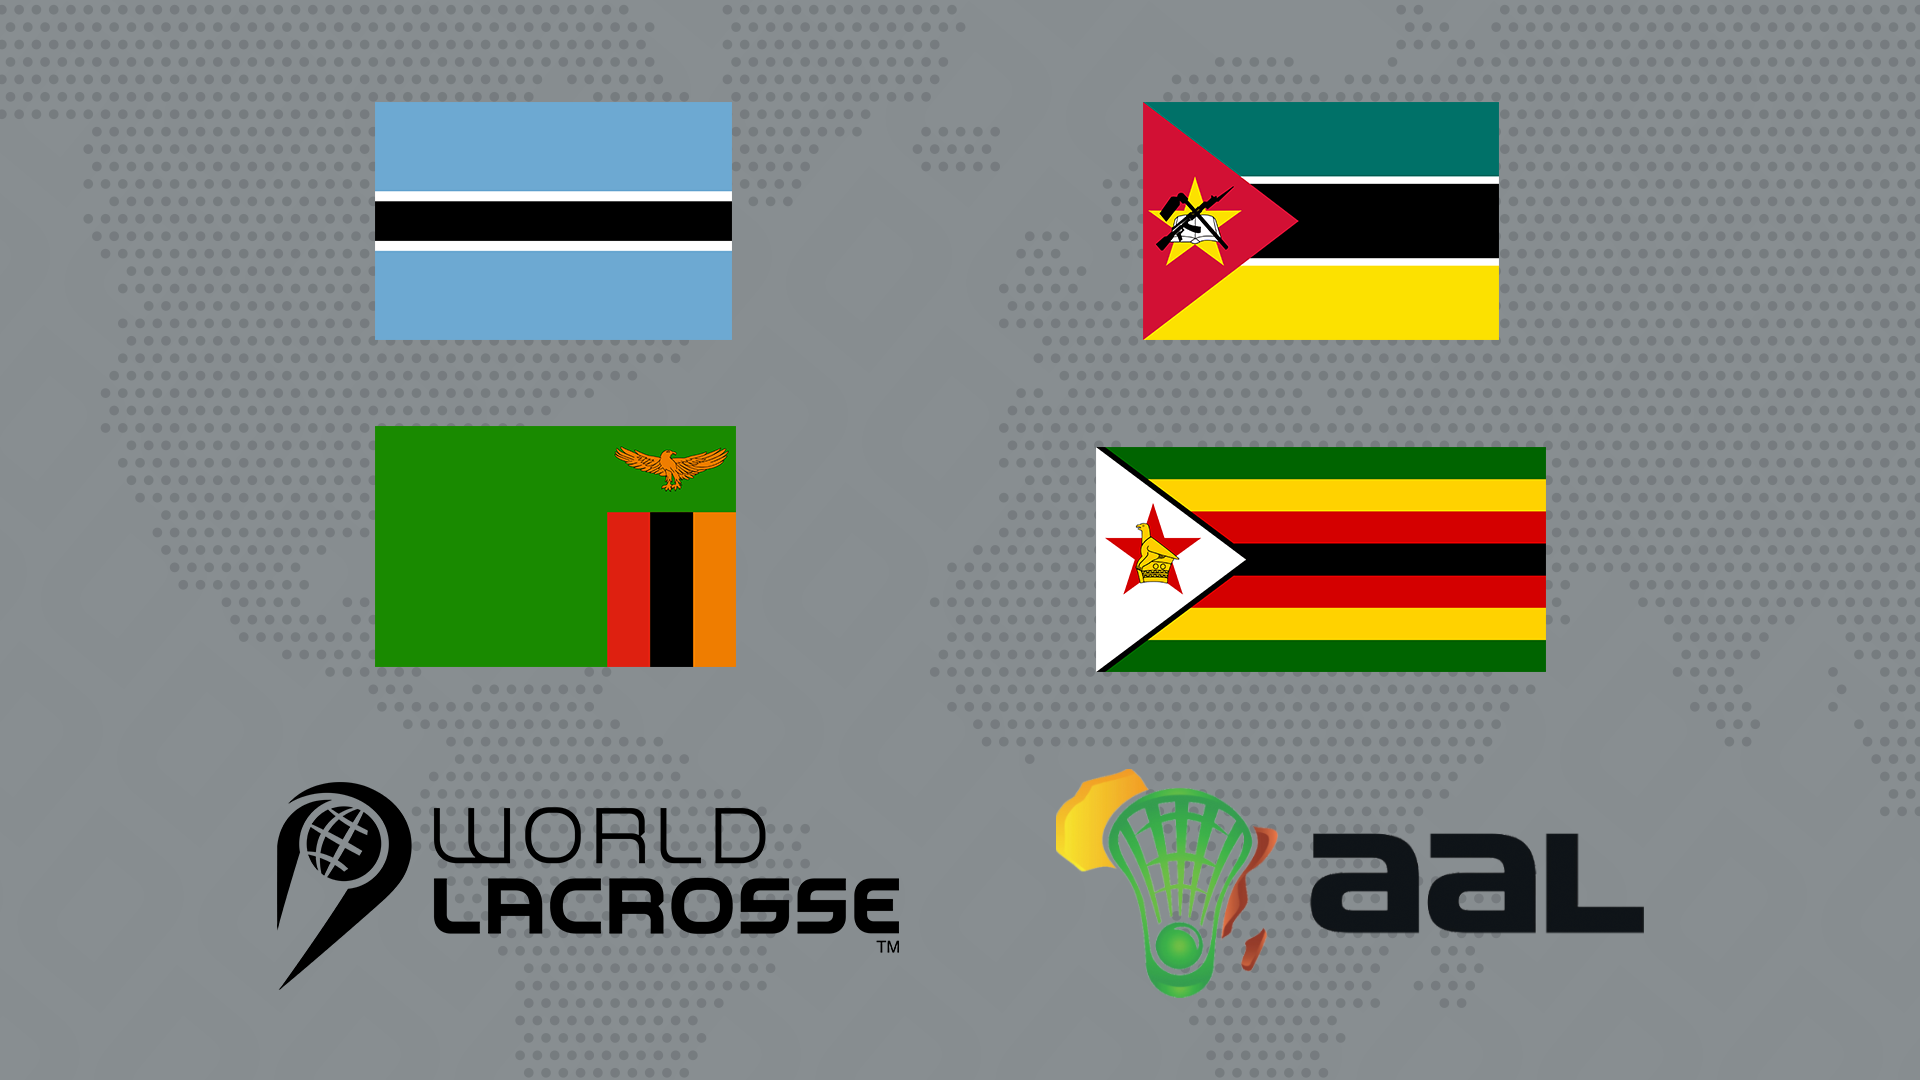 World Lacrosse has announced four new African members ©World Lacrosse